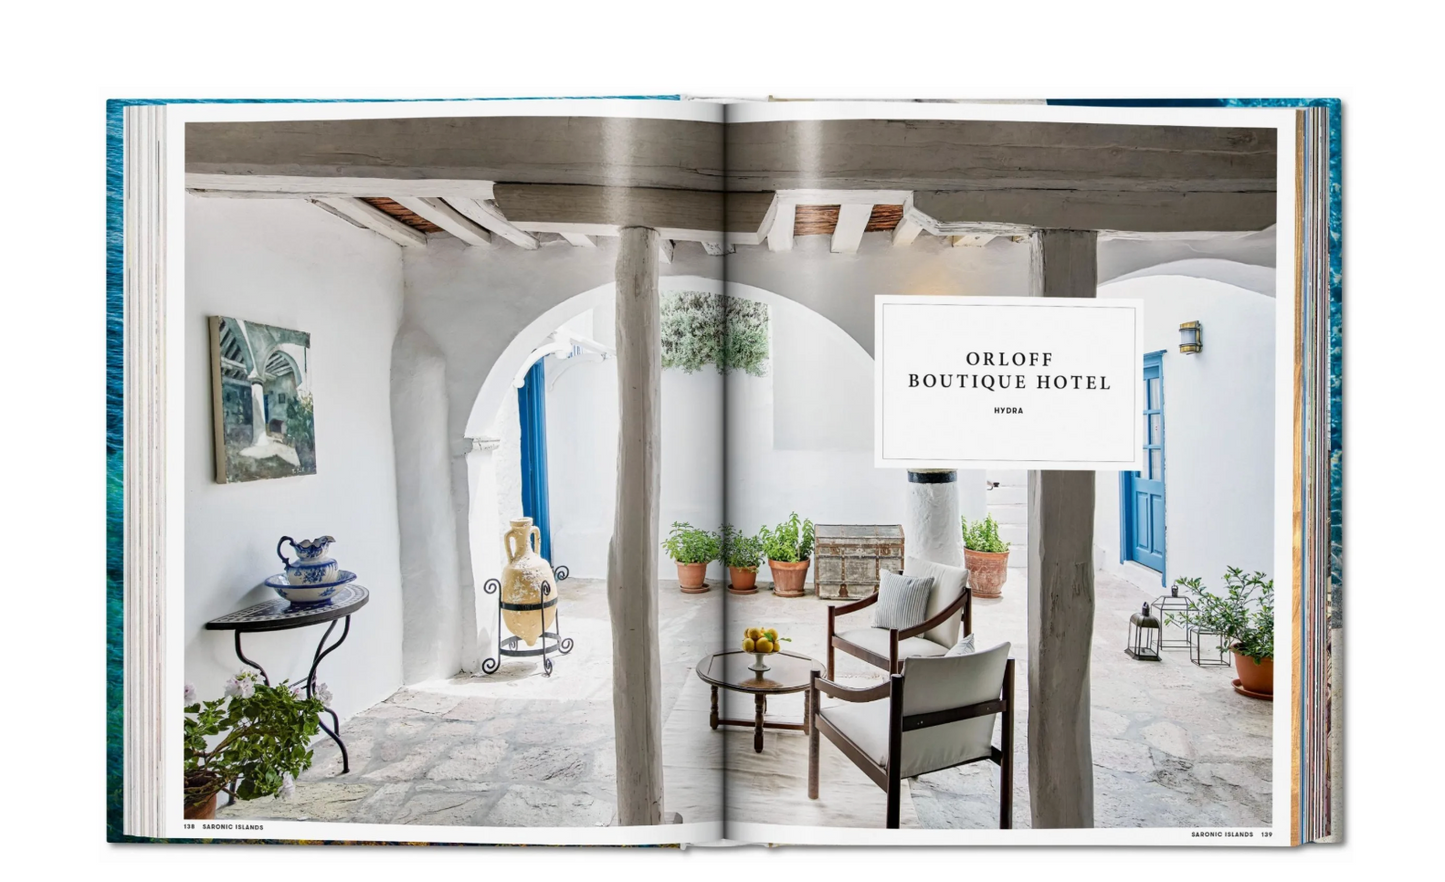 Great Escapes Greece - The Hotel Book - Taschen